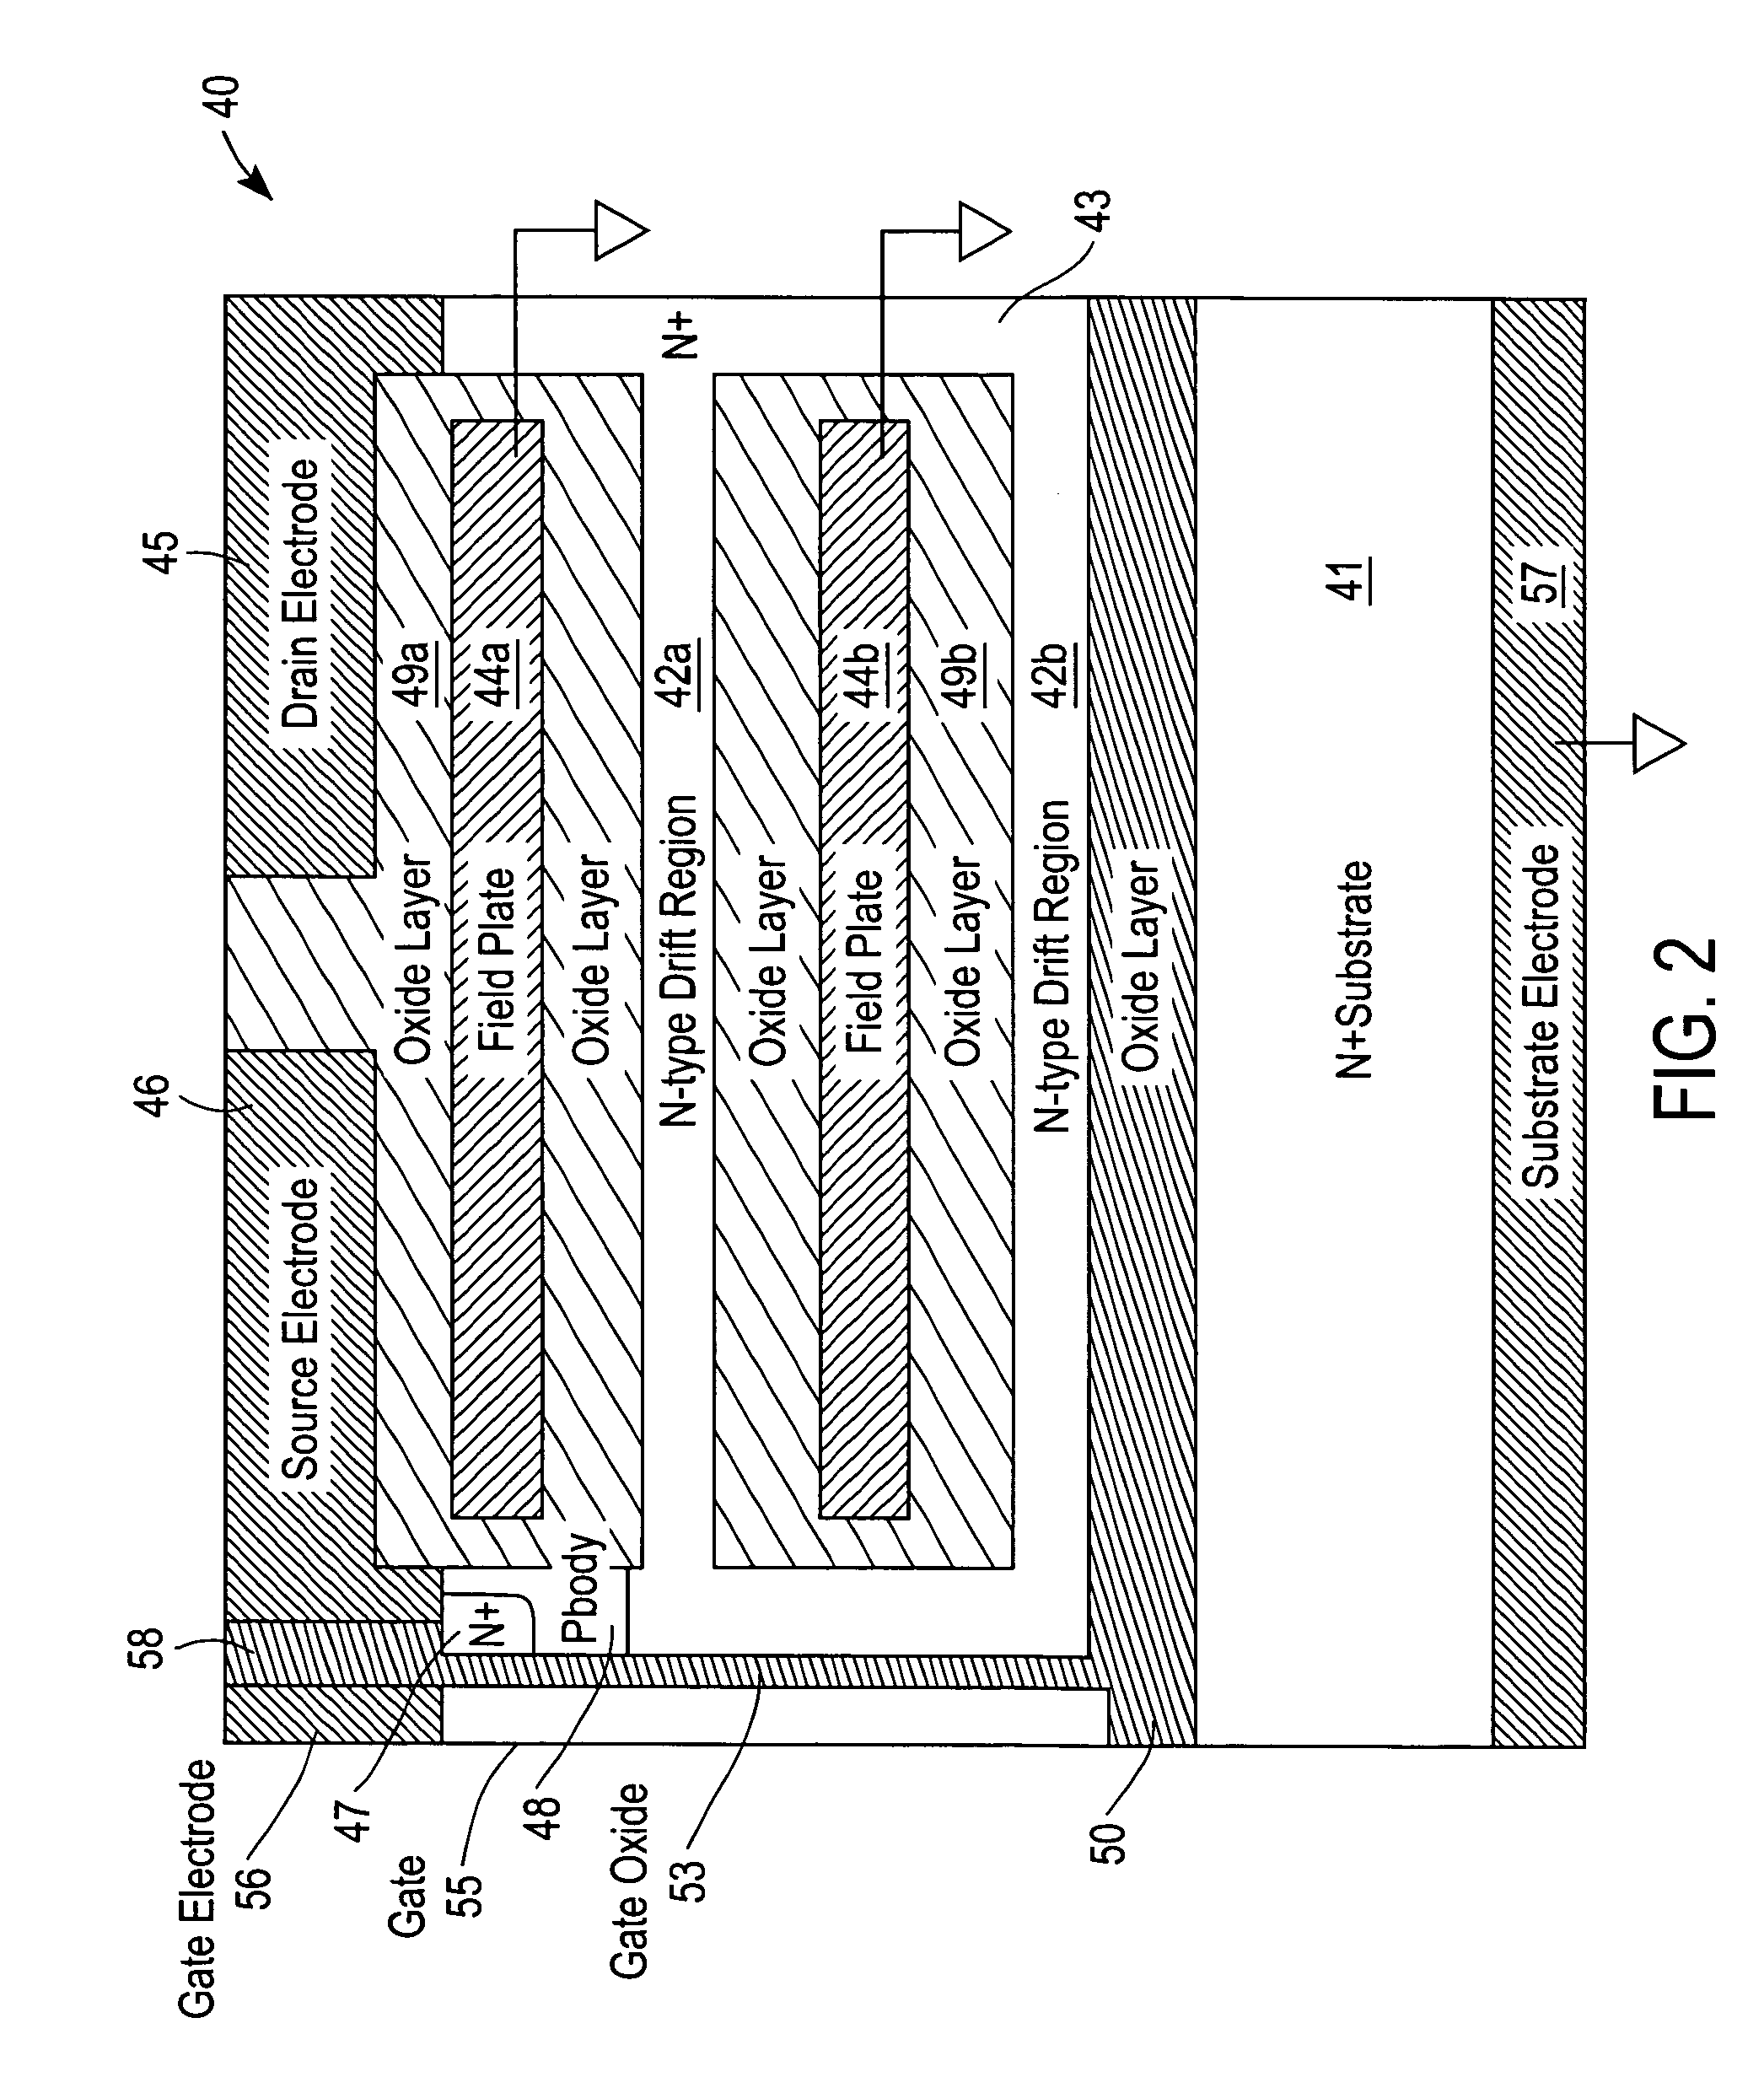 High-voltage vertical transistor with a multi-gradient drain doping profile